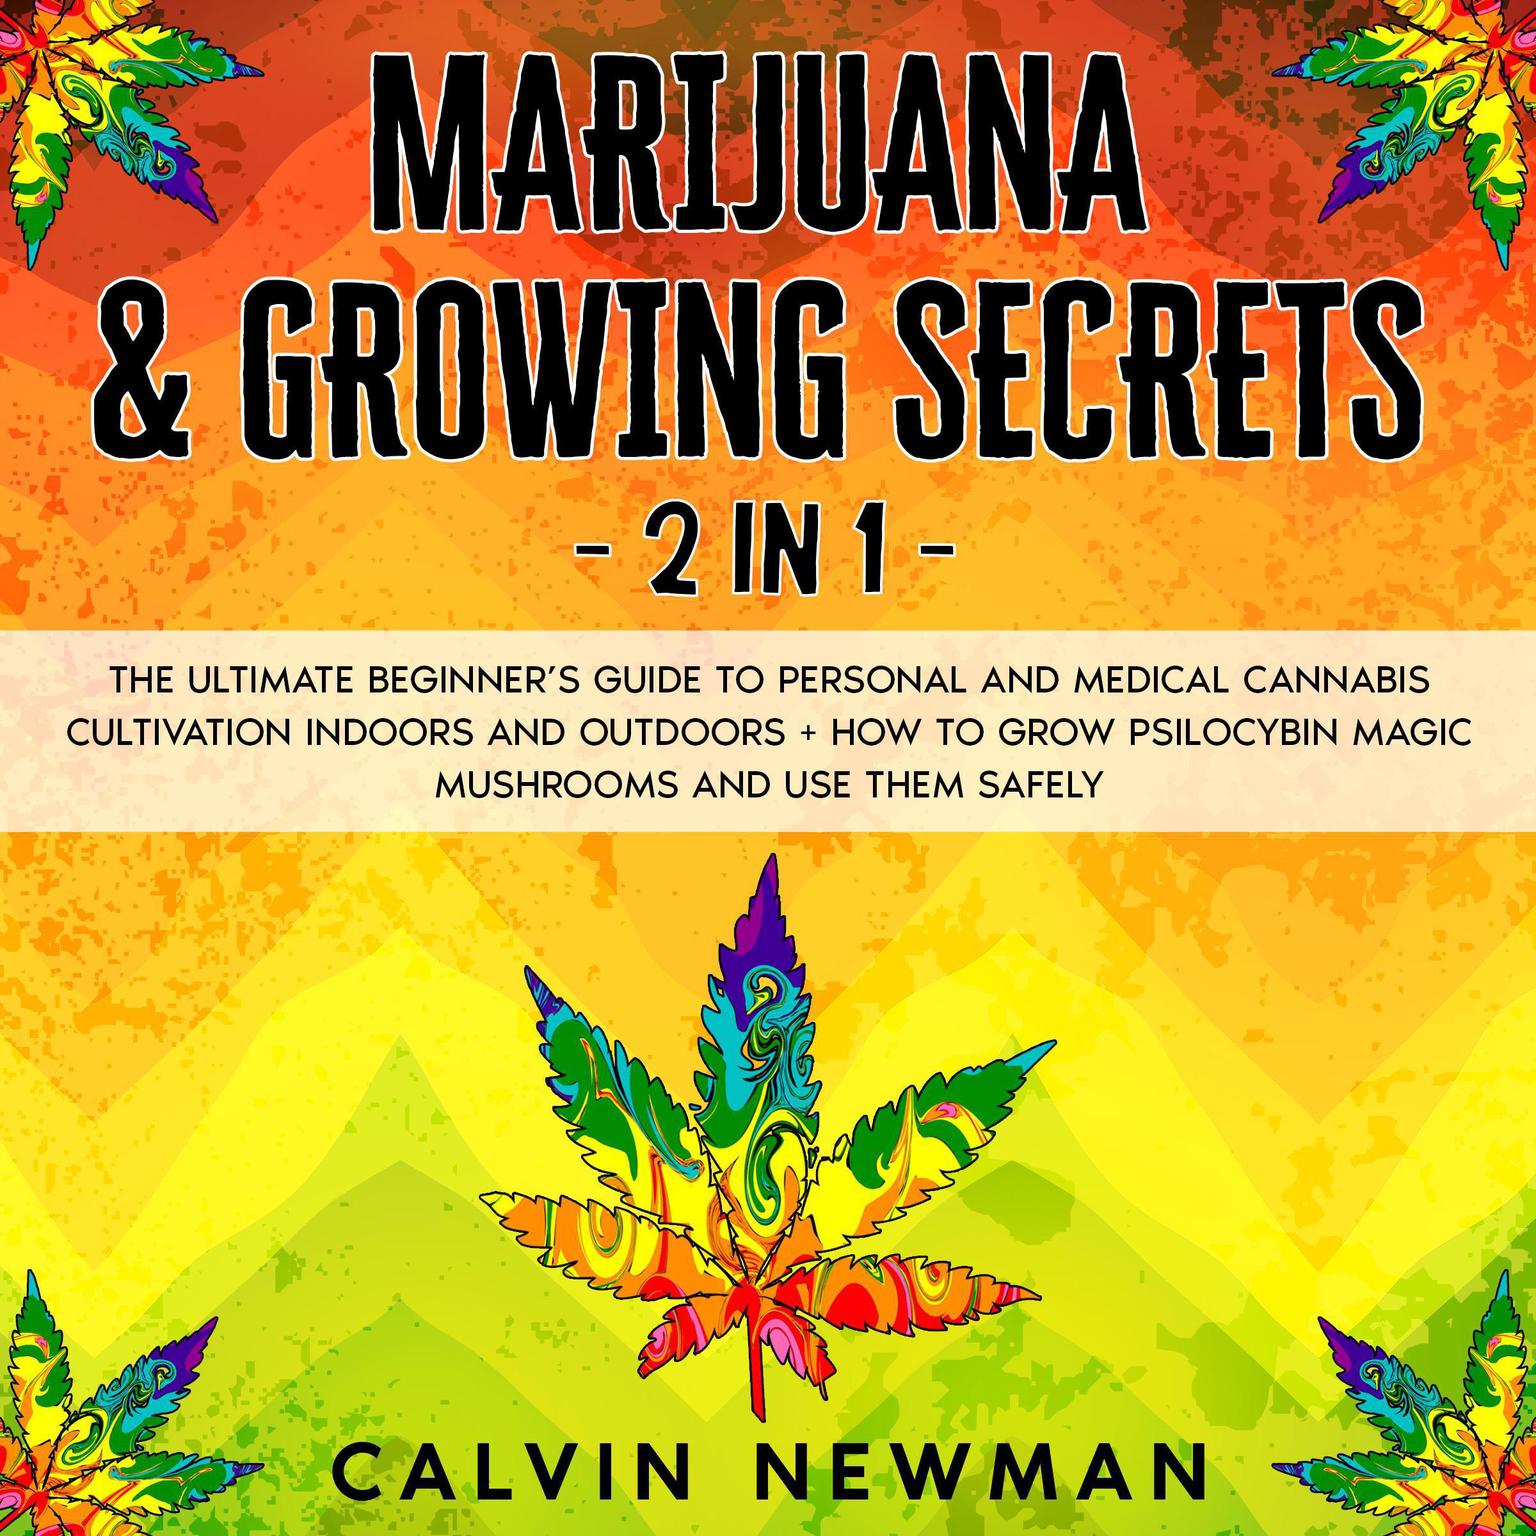 Marijuana & Growing Secrets - 2 in 1: The Ultimate Beginner’s Guide to Personal and Medical Cannabis Cultivation Indoors and Outdoors + How to Grow Psilocybin Magic Mushrooms and Use Them Safely Audiobook, by Calvin Newman